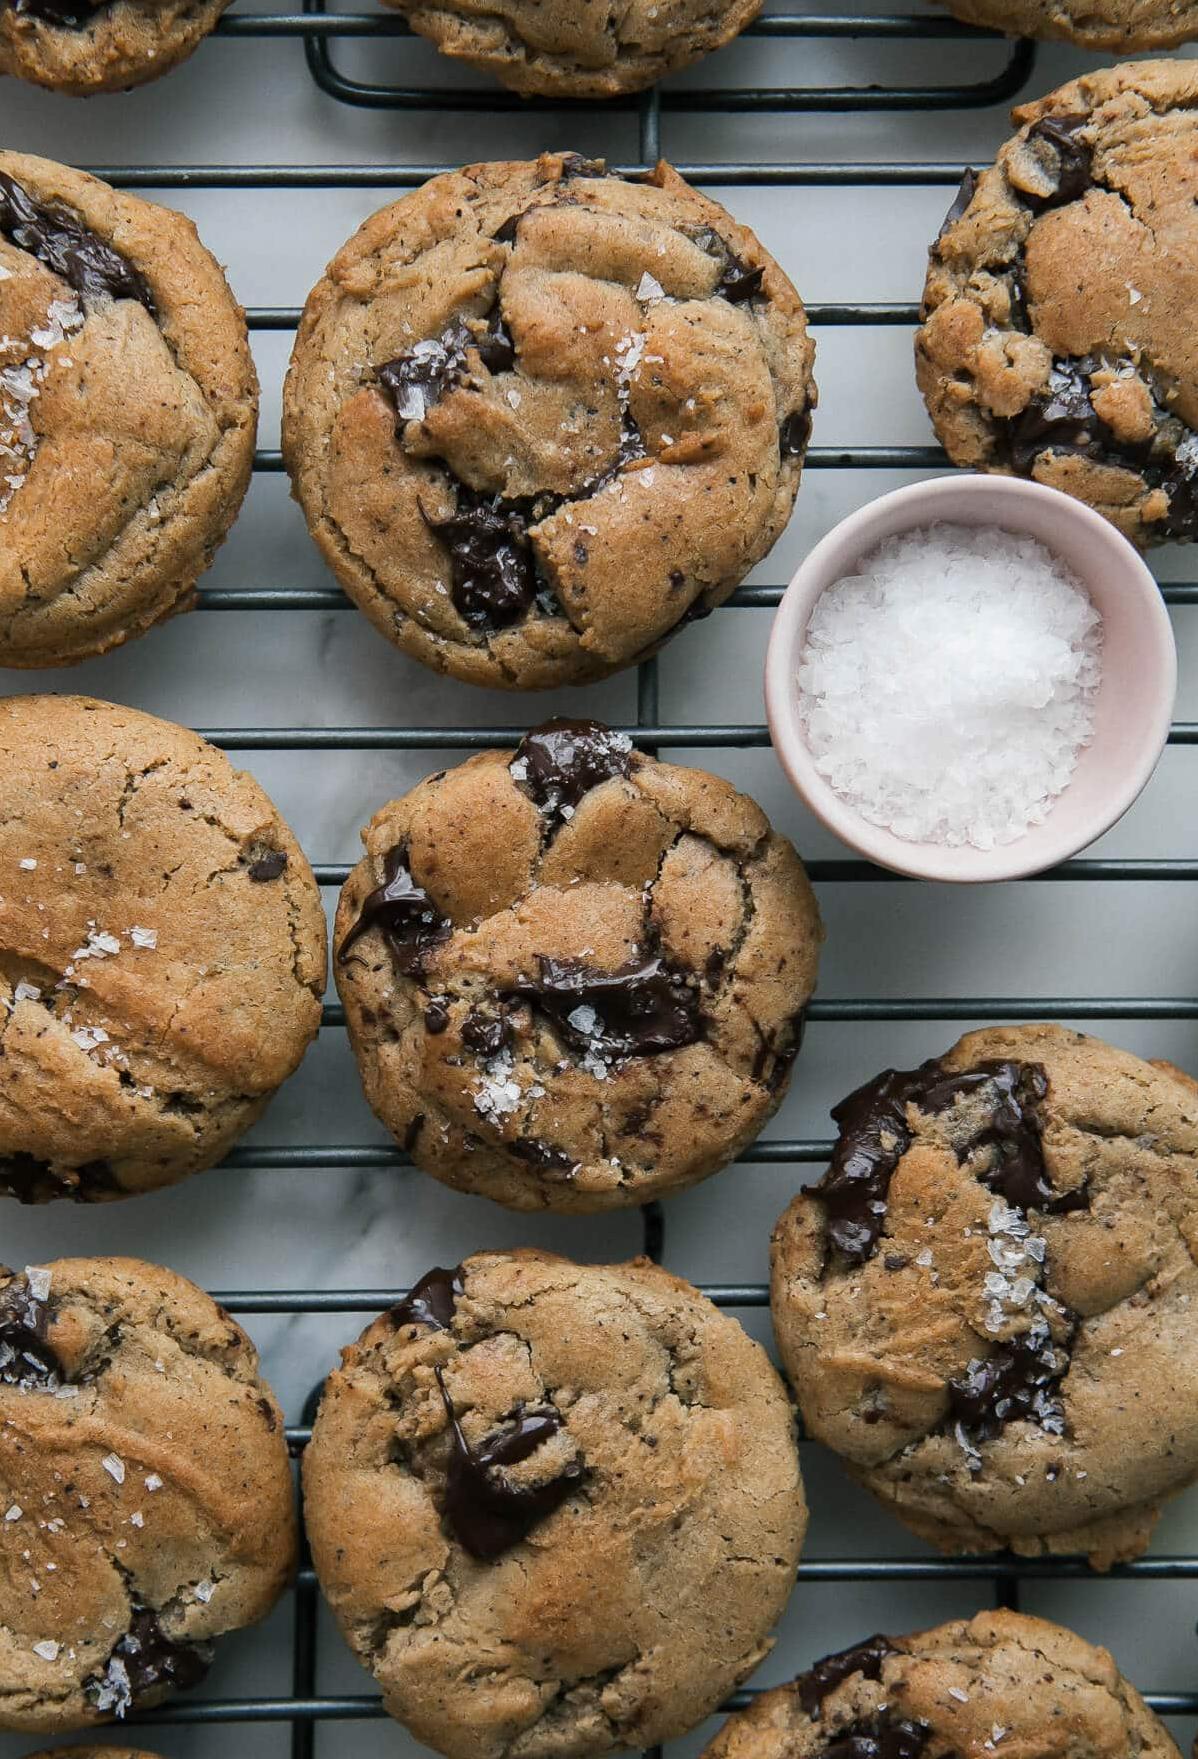  Perfect for any time of day - enjoy these cookies with your morning coffee or an after dinner treat.